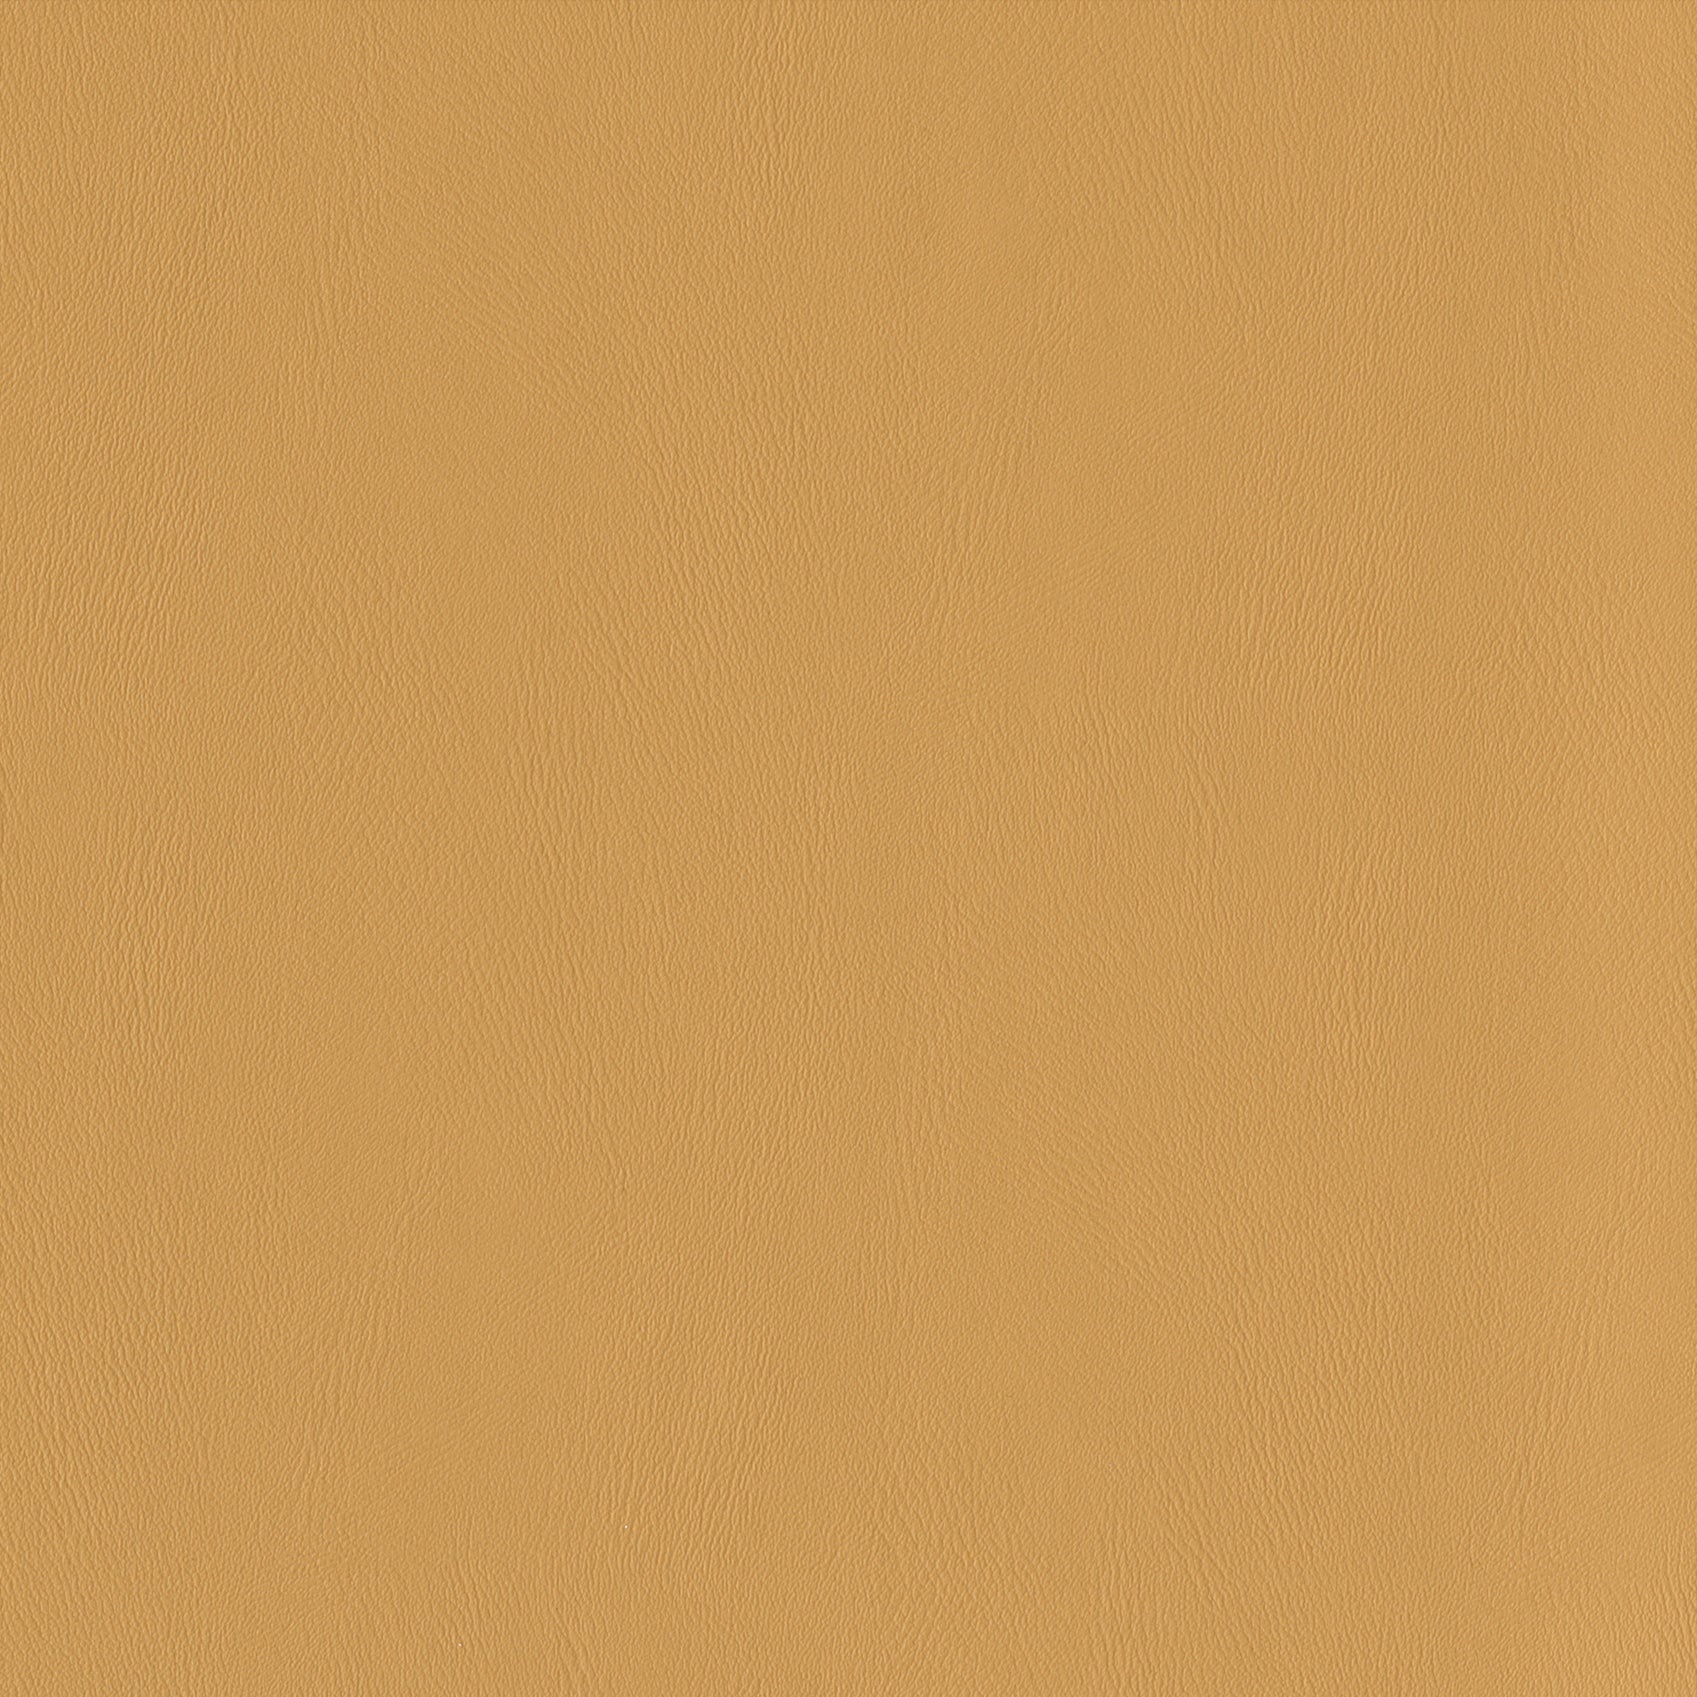    Andriali-Contract-Vinyl_Upholstery-Design-SoloFR5-Color-130ButterScotch-Width-140cm